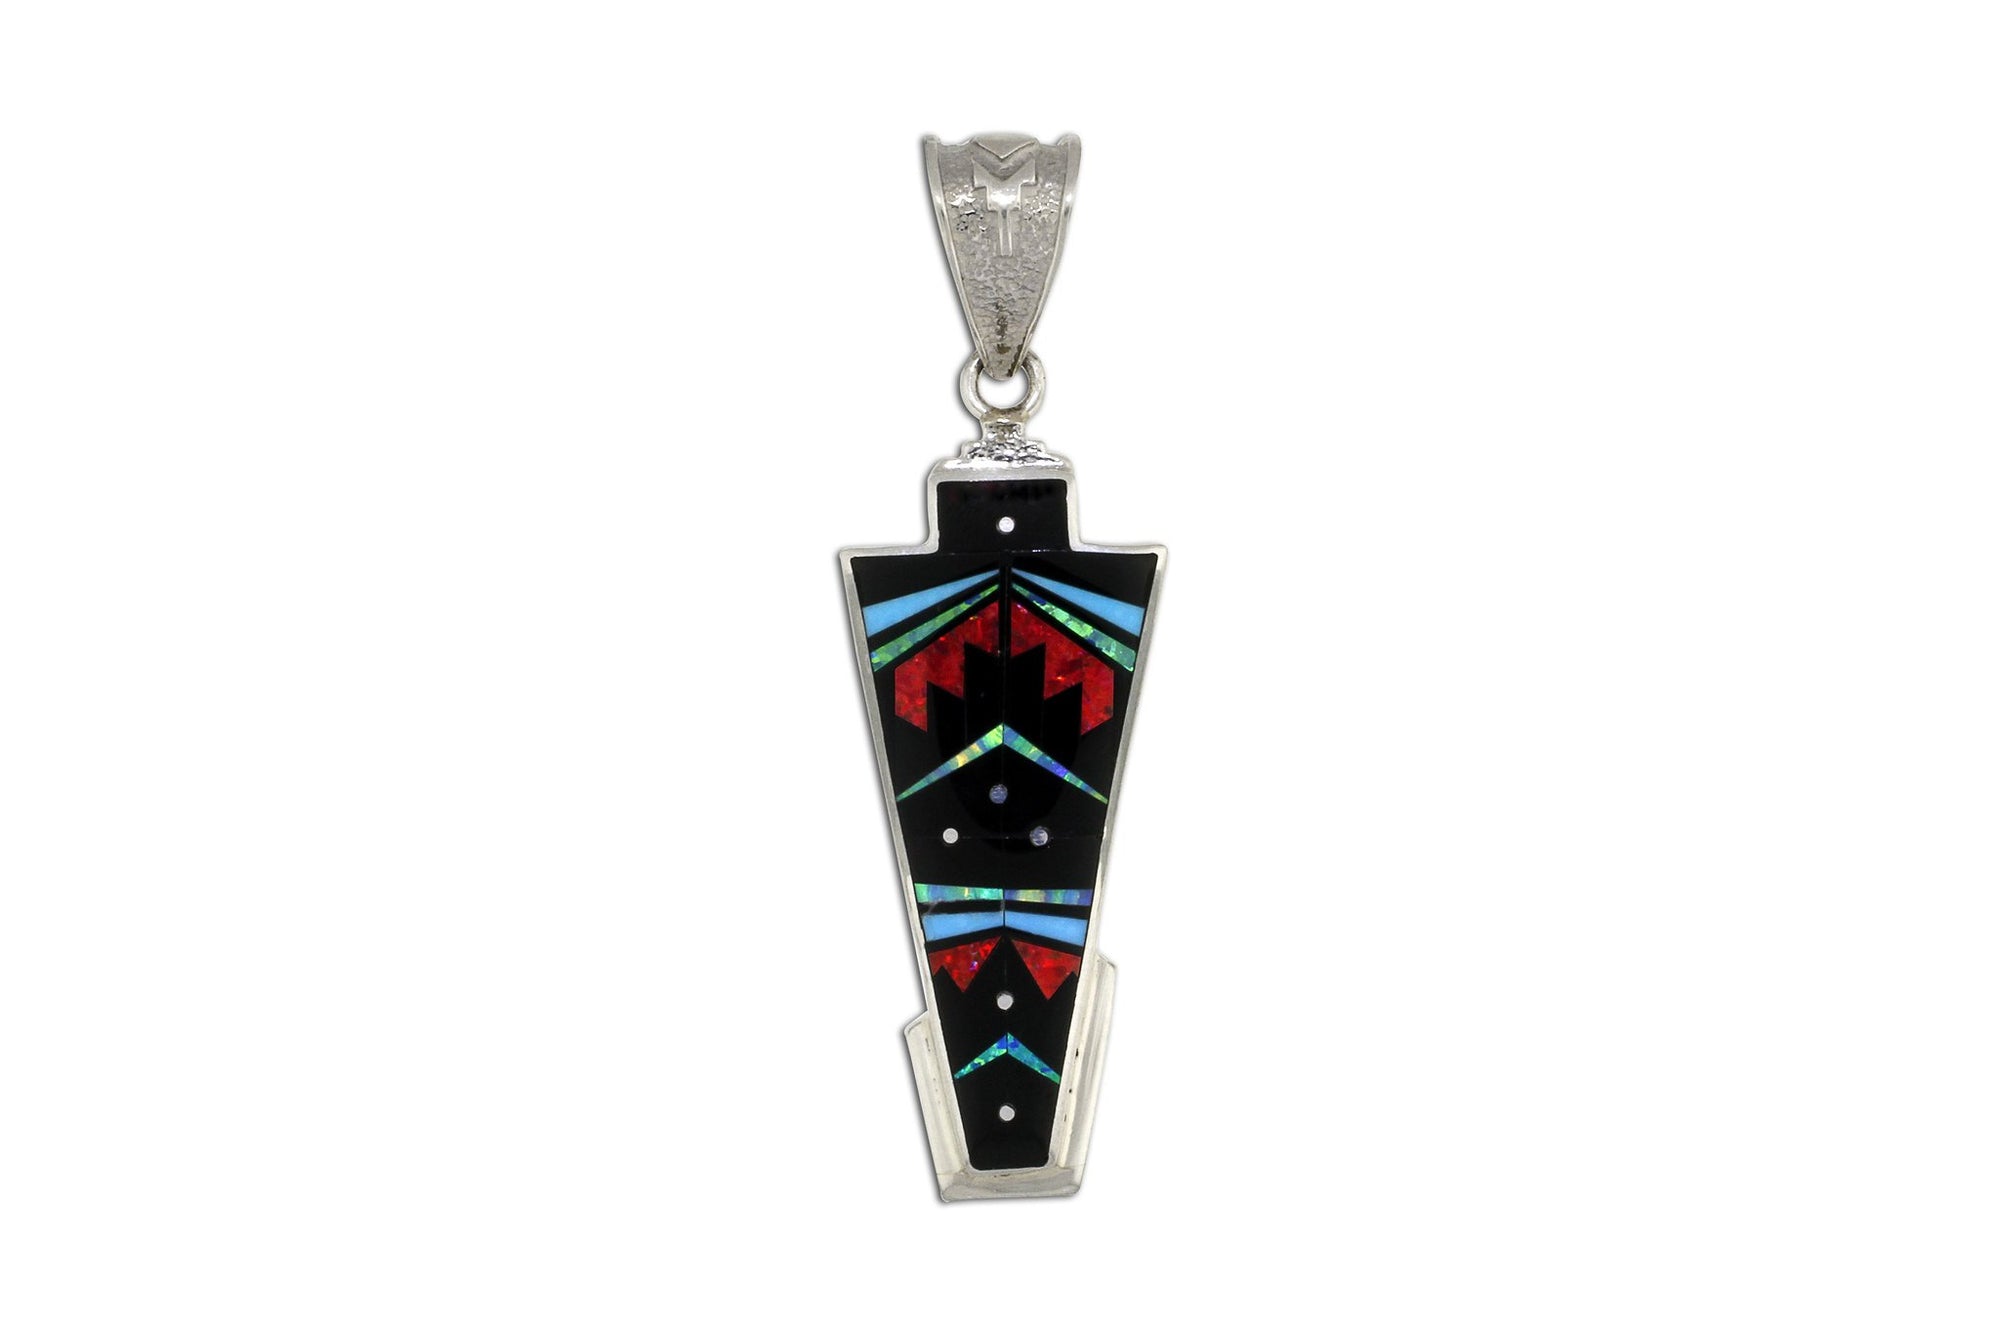 Native American Jewelry - David Rosales Red Moon Inlaid Pendant